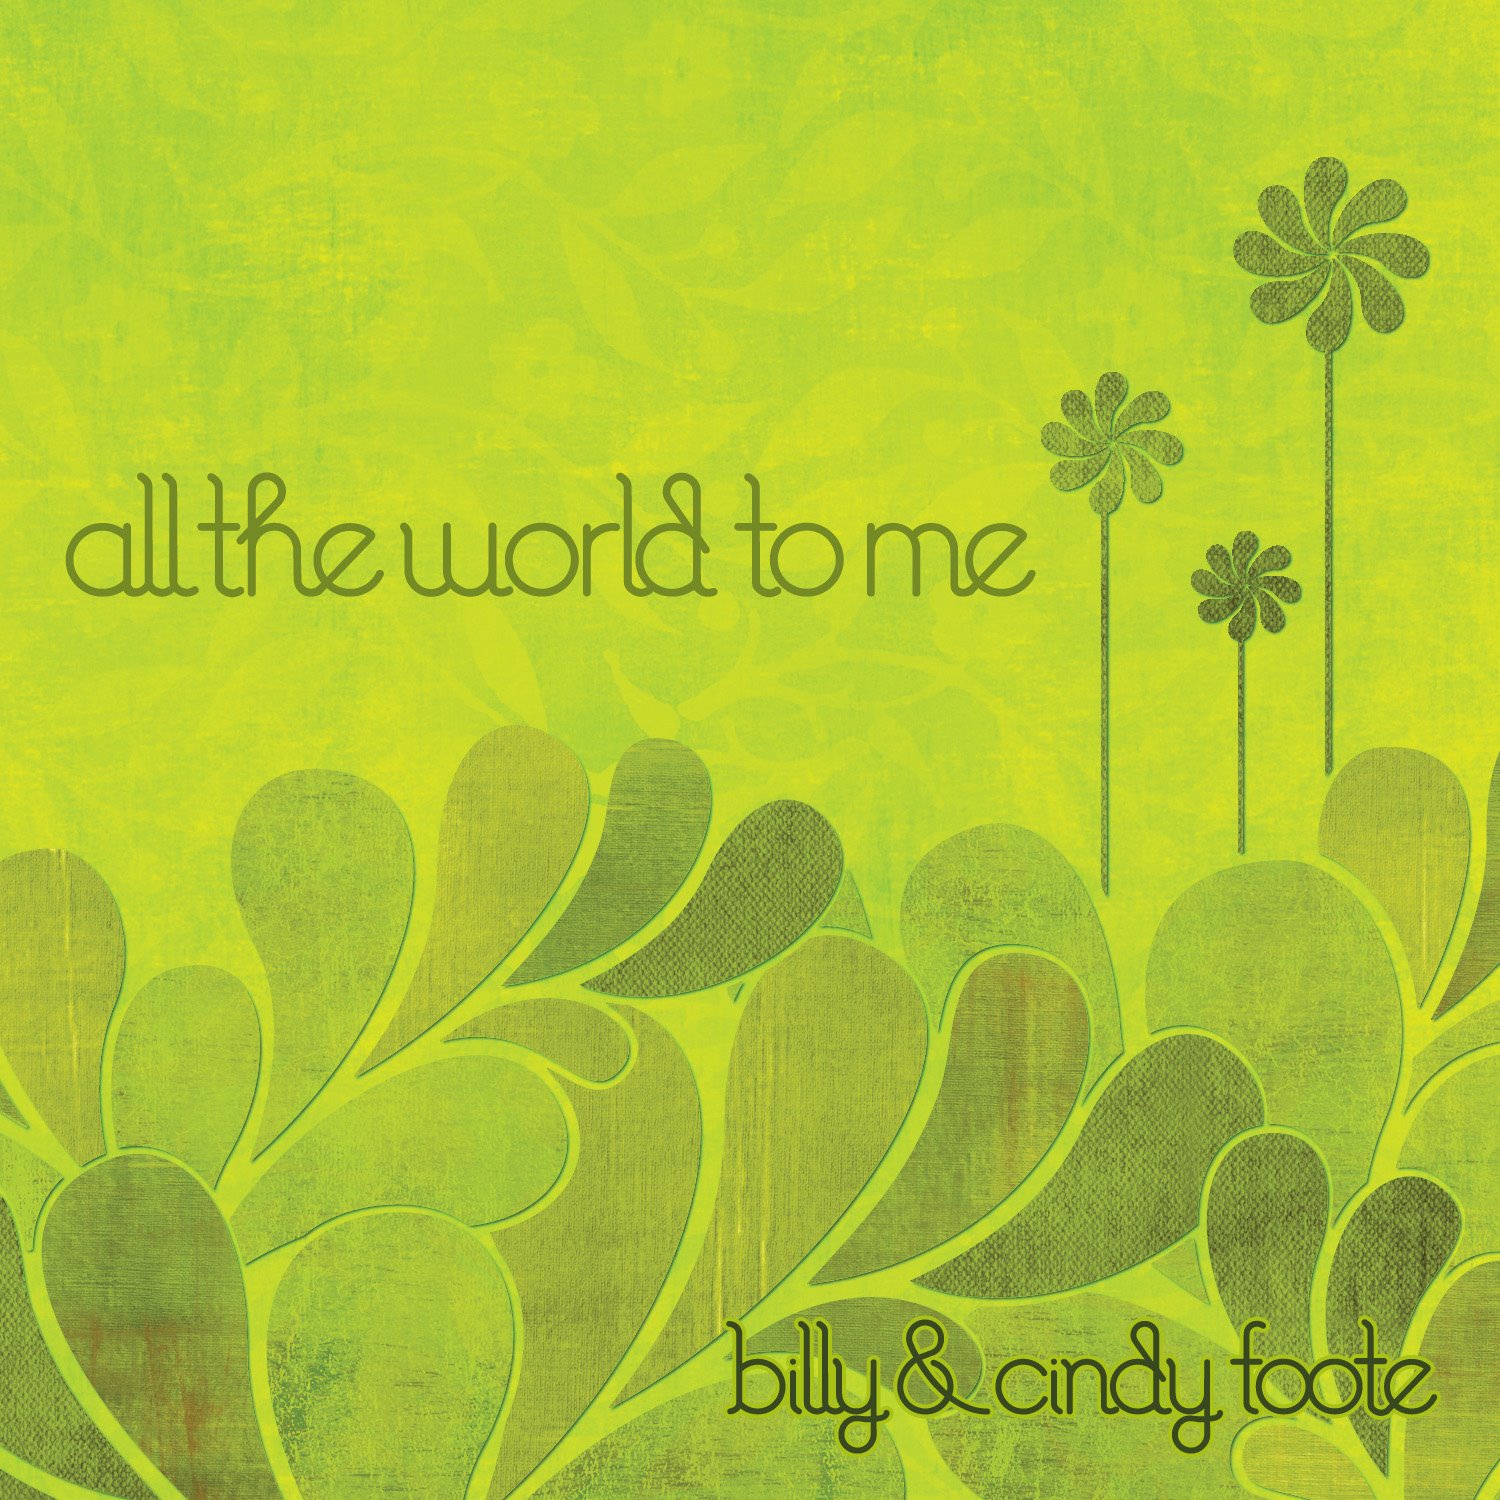 [all+the+world+to+me.bmp]